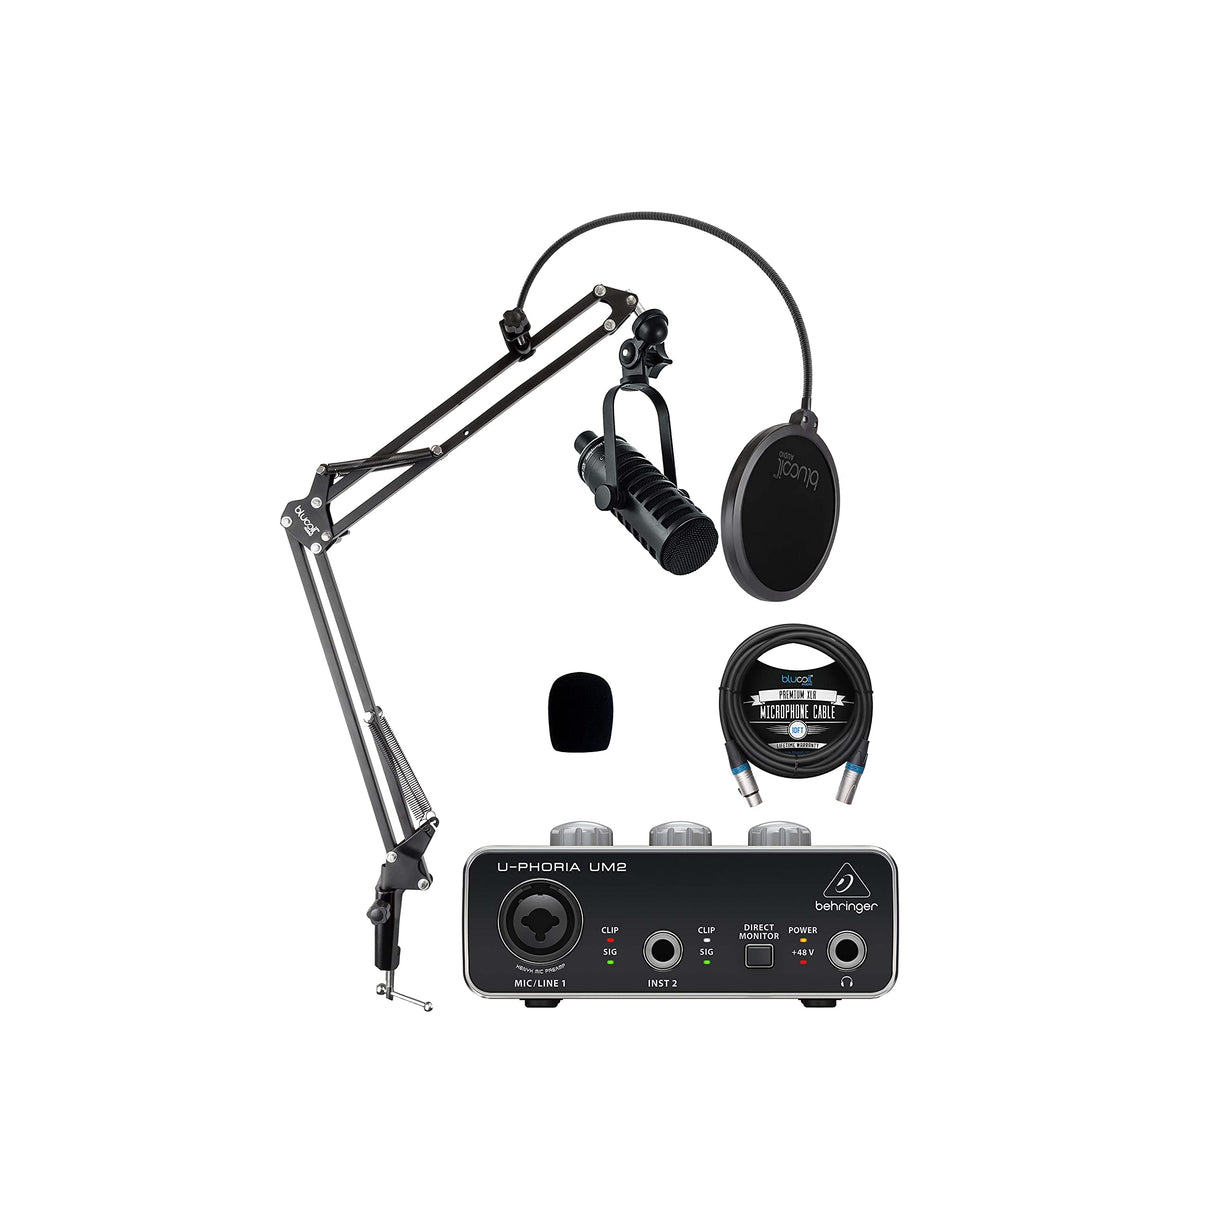 MXL BCD-1 Dynamic Mic for Podcasting and Vocal Recording Bundle with Behringer U-PHORIA UM2 USB Audio Interface for Windows and Mac, Blucoil 10-FT Balanced XLR Cable and Boom Arm Plus Pop Filter